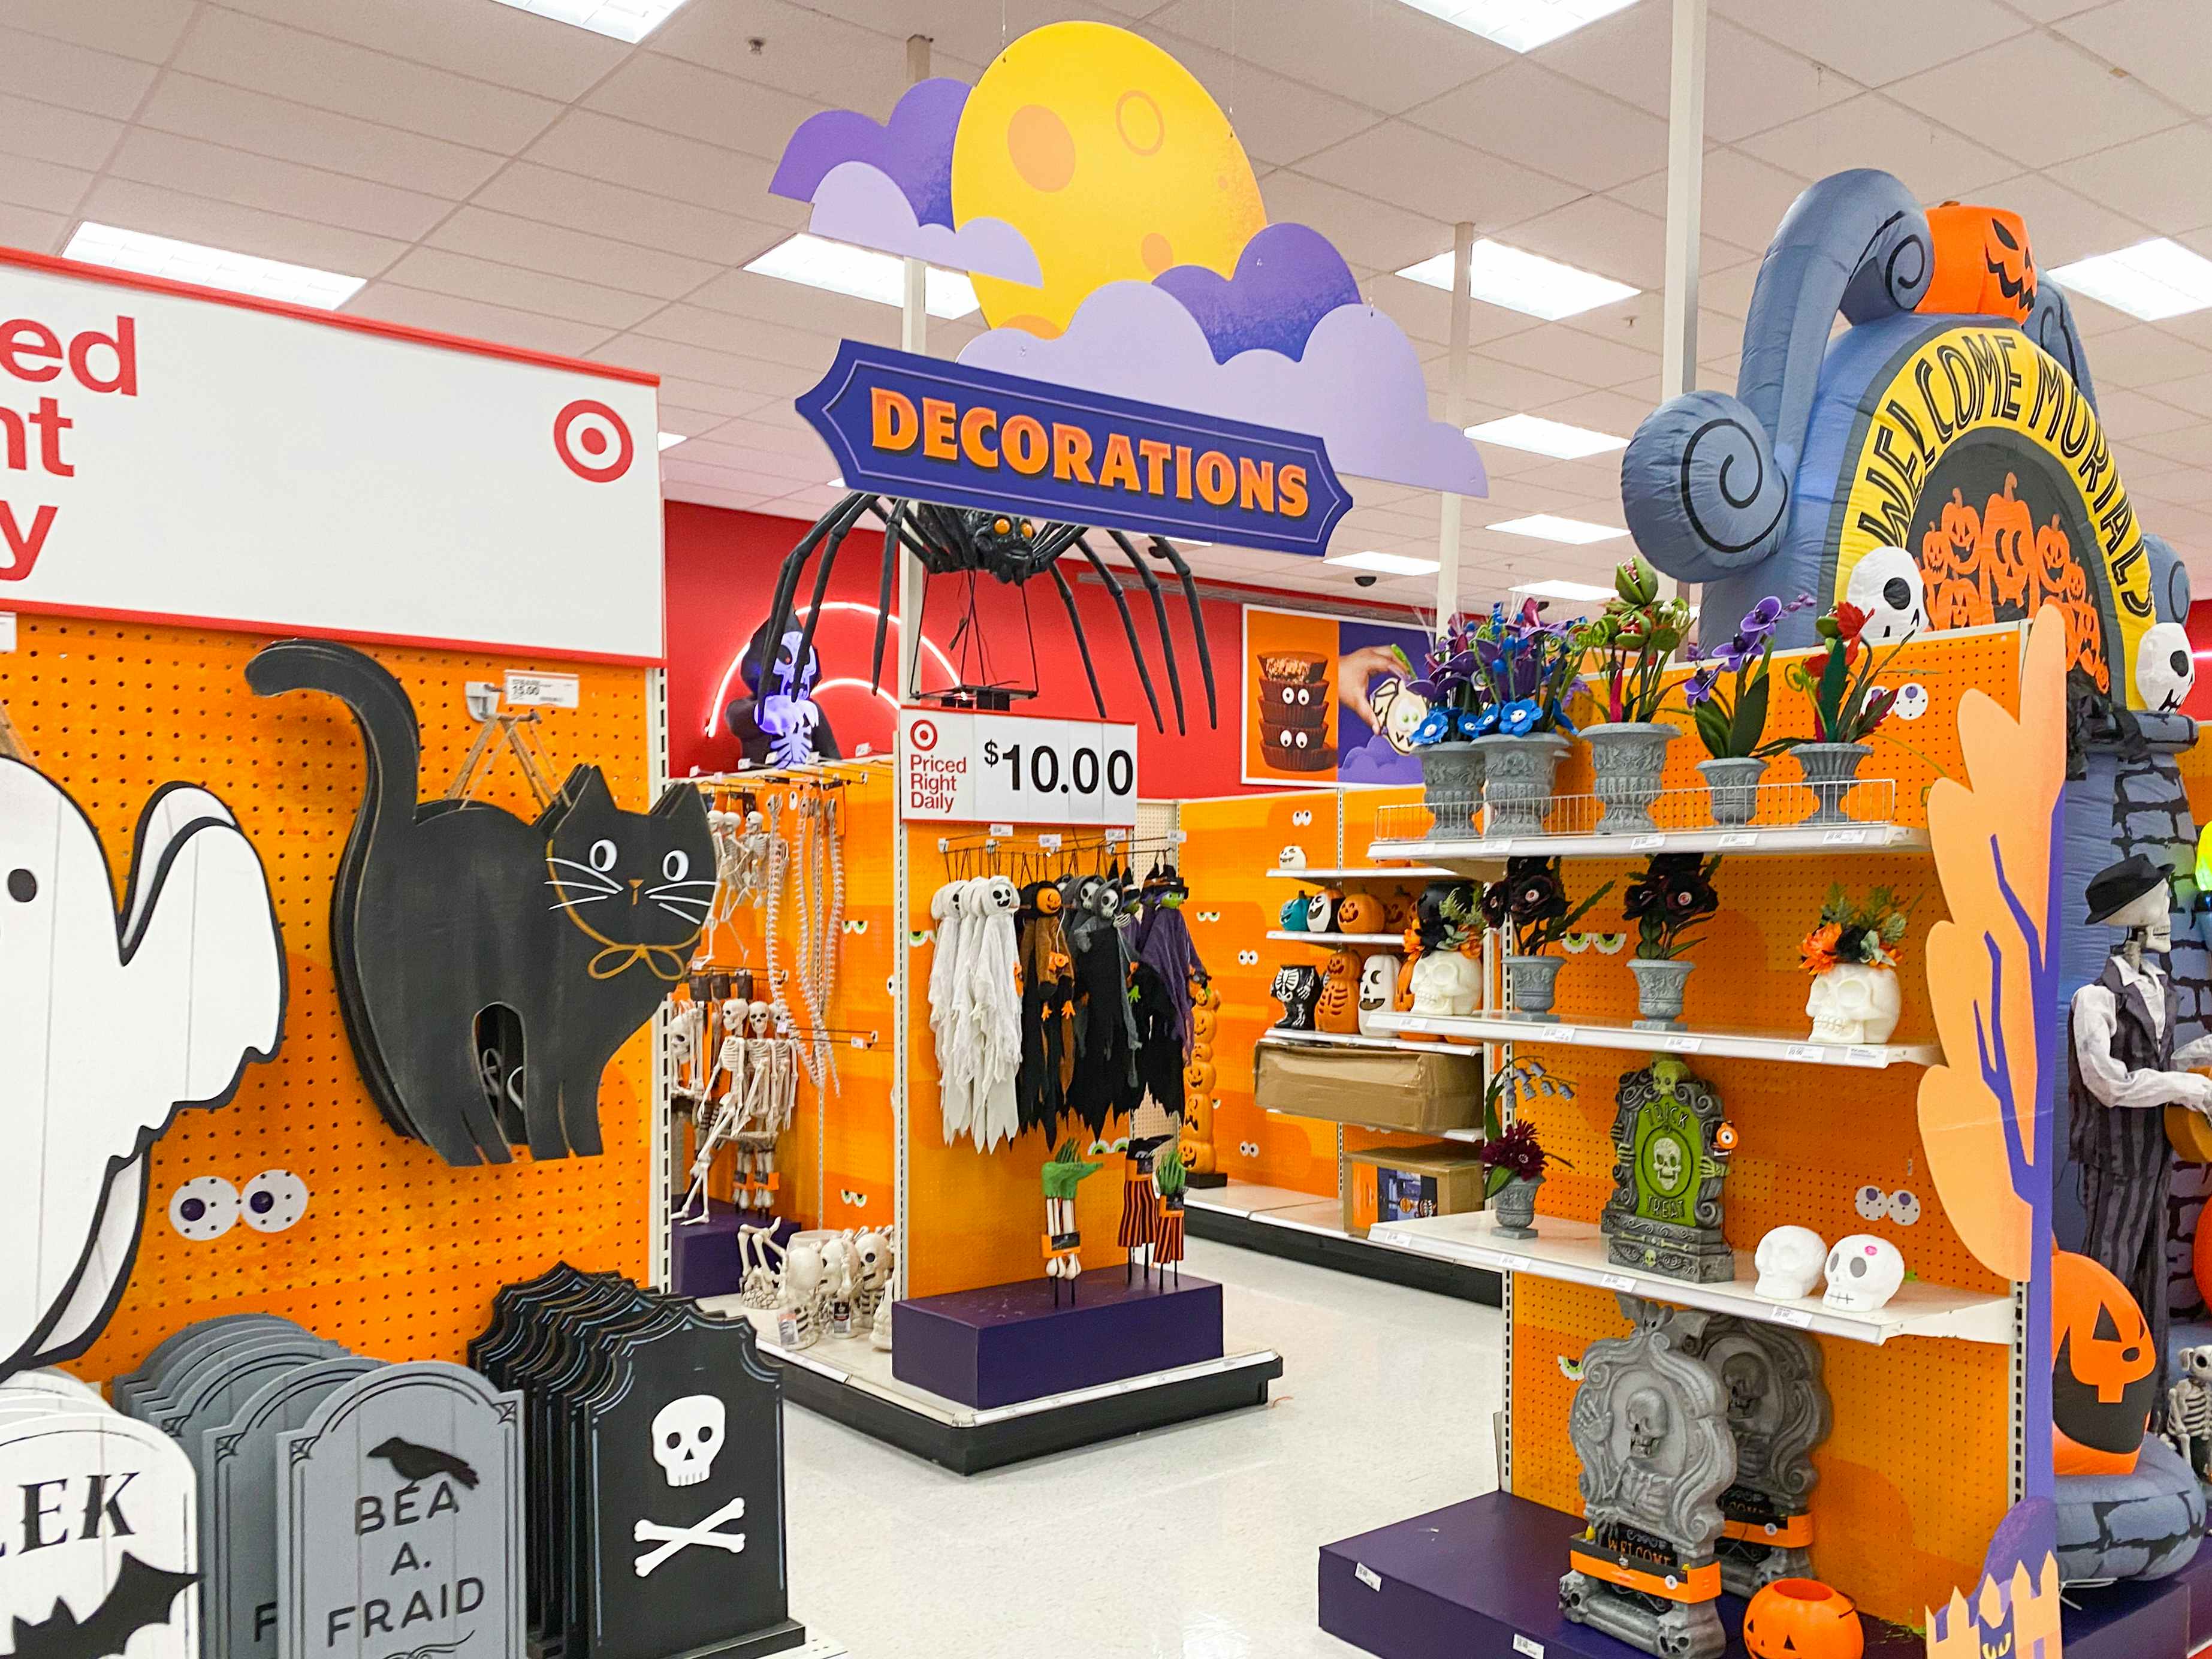 https://prod-cdn-thekrazycouponlady.imgix.net/wp-content/uploads/2022/09/target-halloween-decorations-costumes-section-area-display-19-1664826482-1664826482.jpg?auto=format&fit=fill&q=25